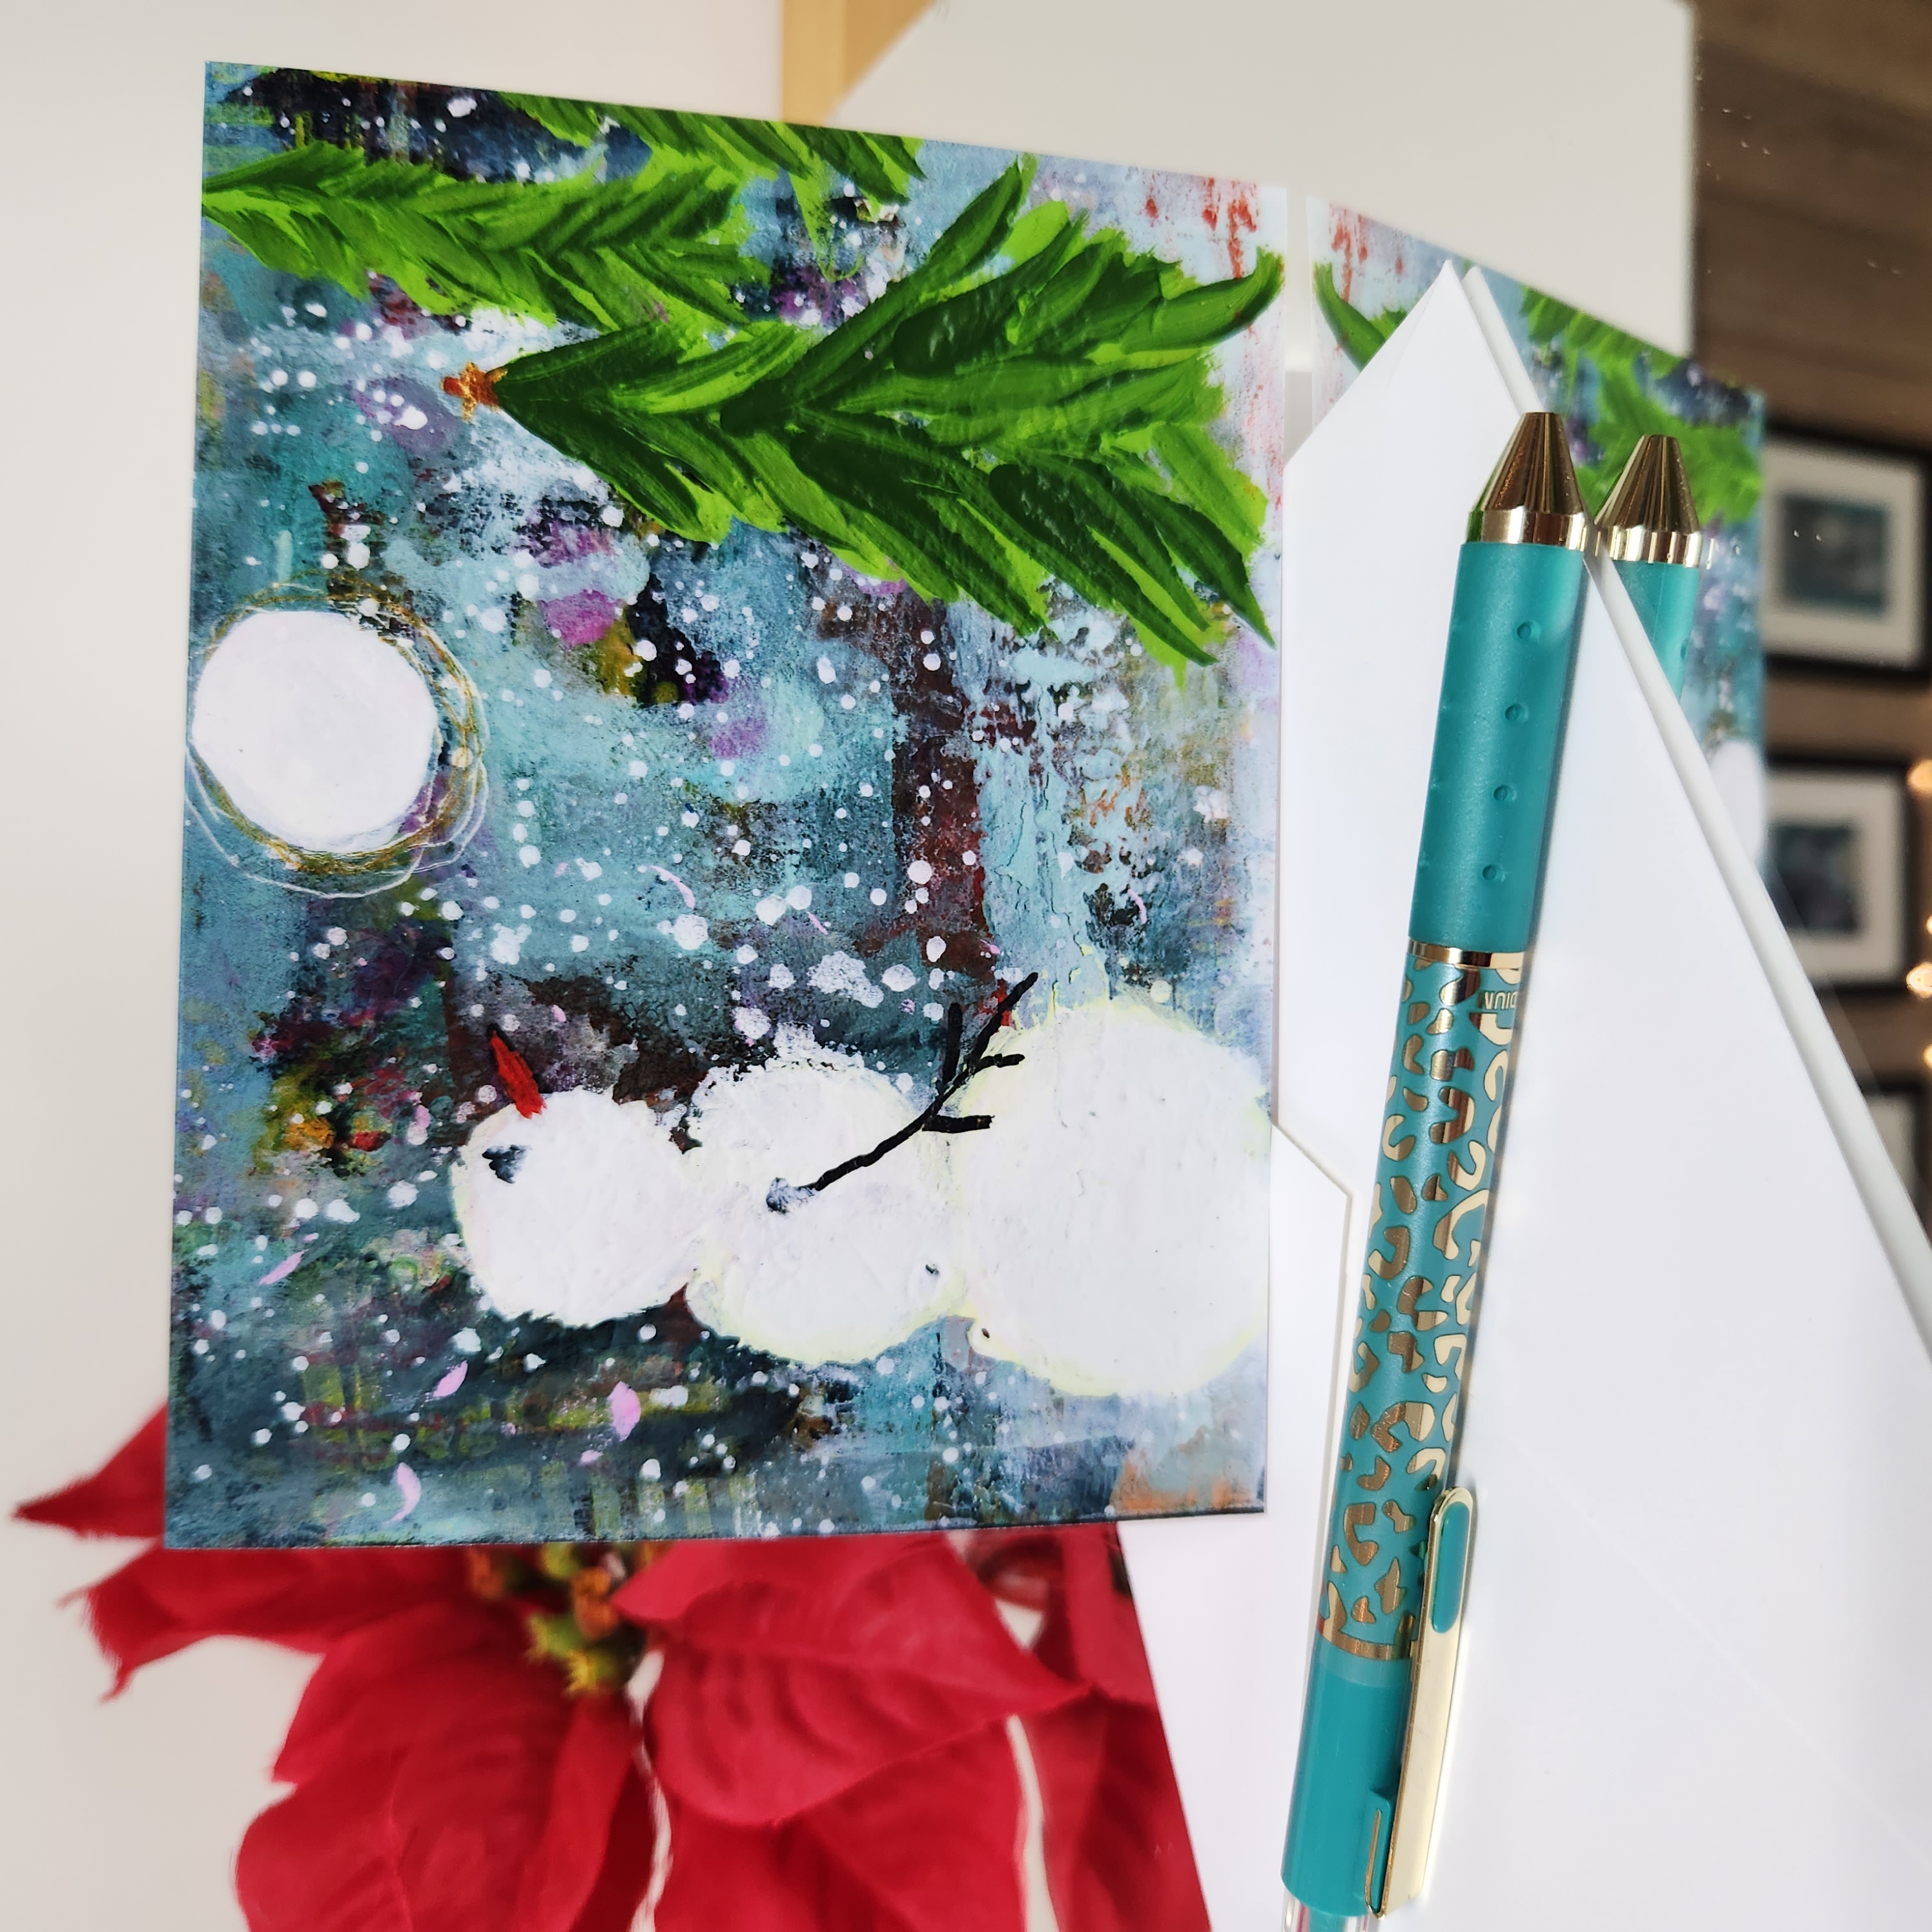 Winter Wonder - A2 size holiday  greeting  card with a snowman forest scene on the front. Patty Donahue artist